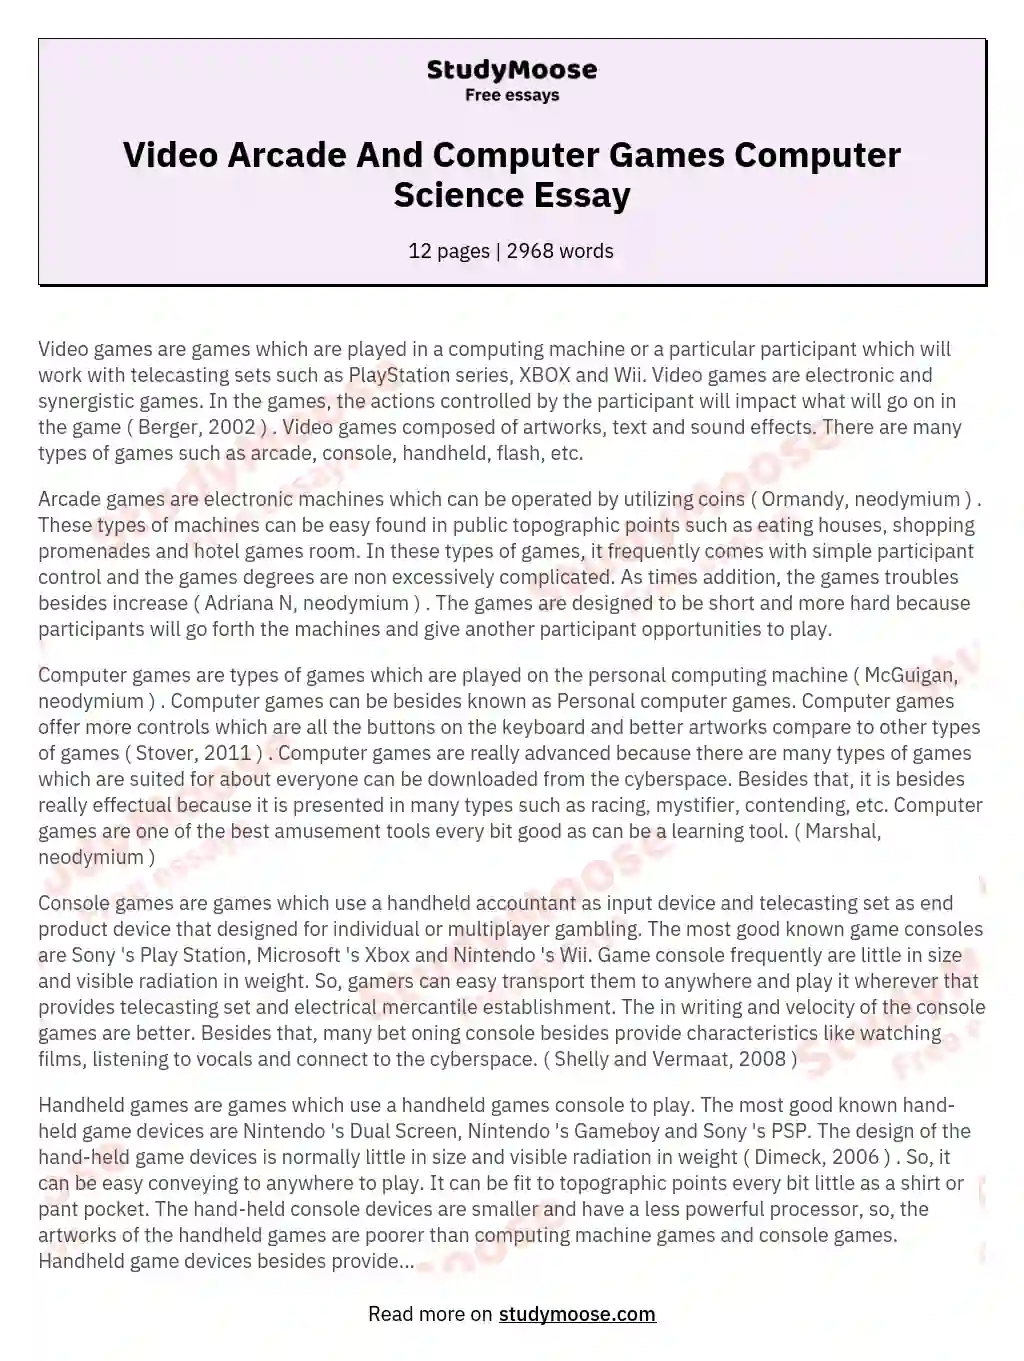 Video Arcade And Computer Games Computer Science Essay